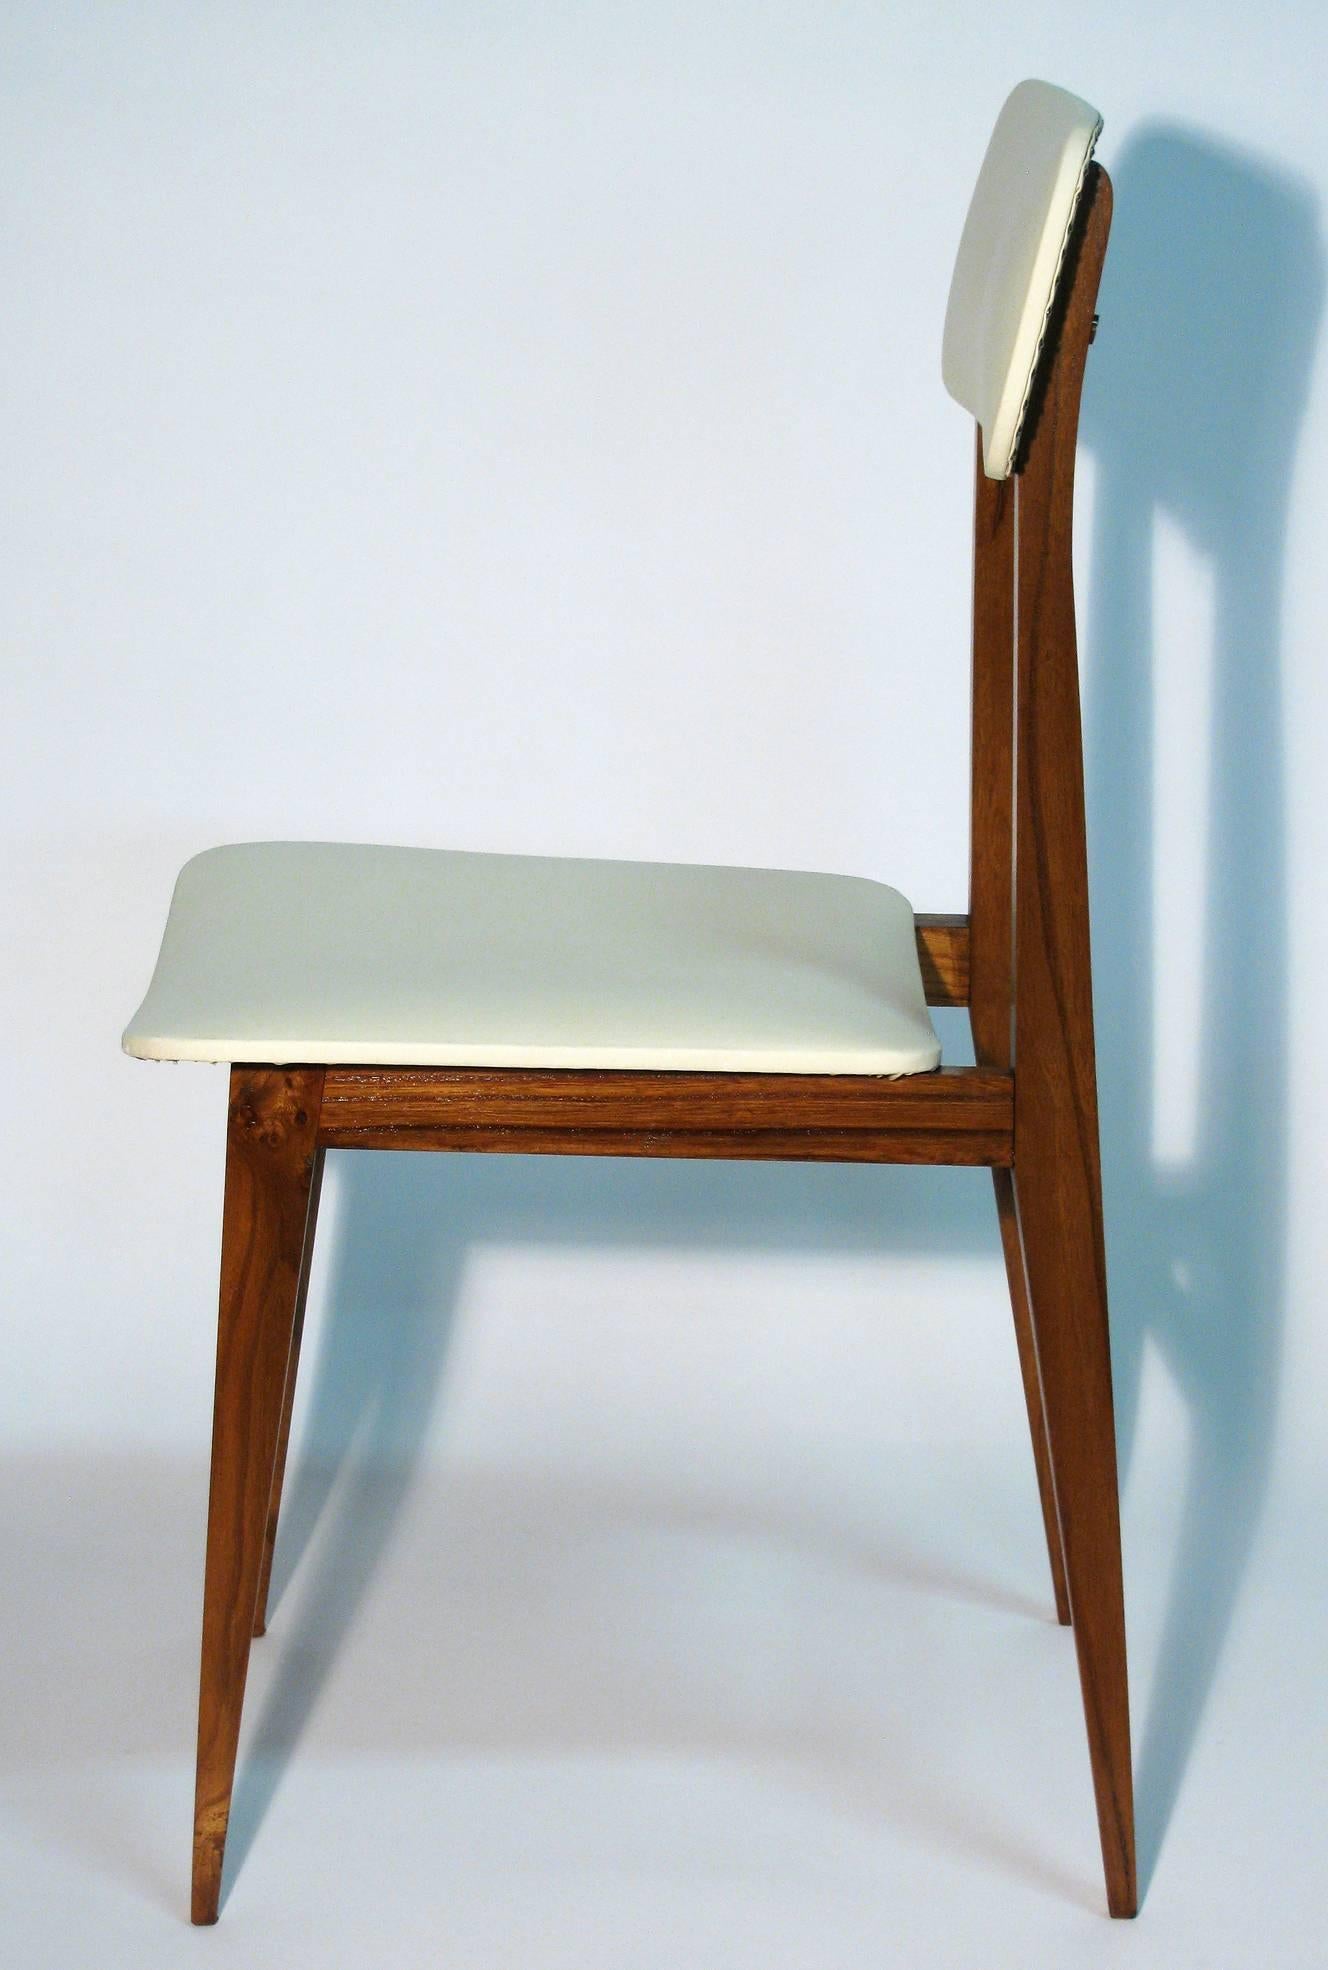 Stained Italian Modernist Chair For Sale